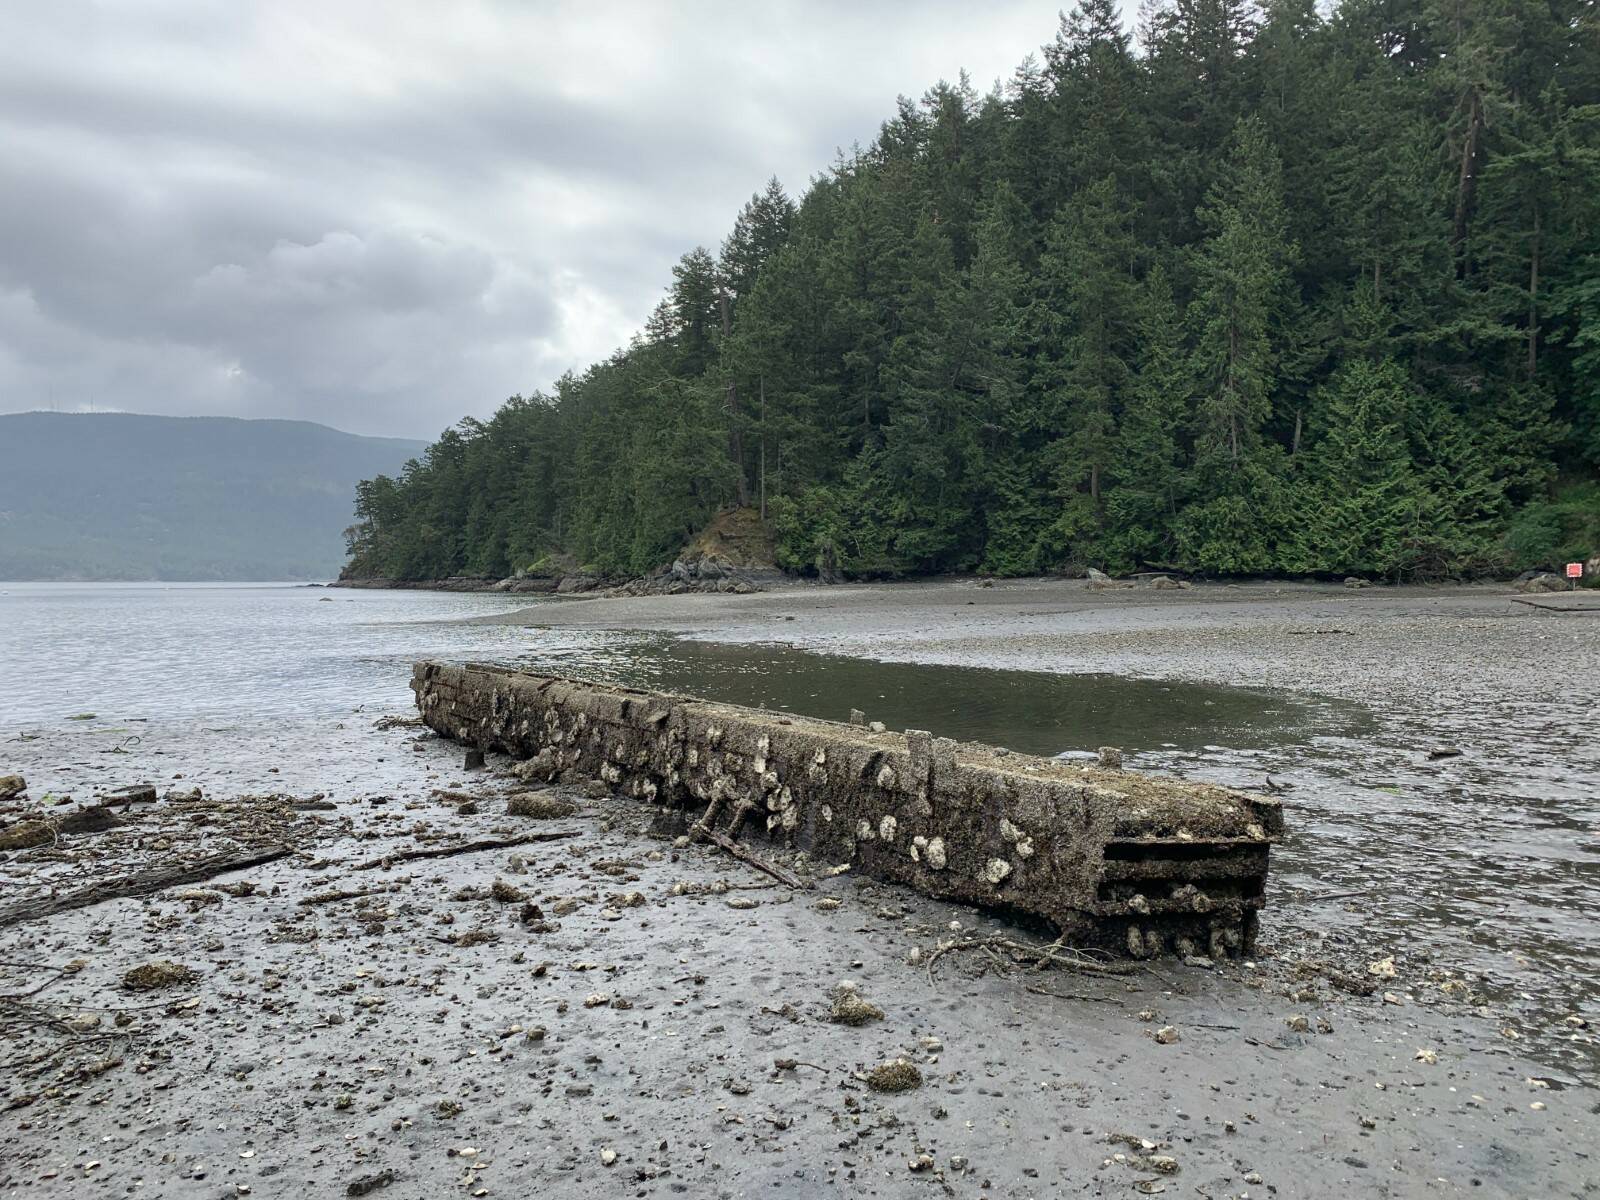 A derelict concrete structure located offshore of the San Juan Conservation Land Bank’s Judd Cove Preserve on Orcas Island